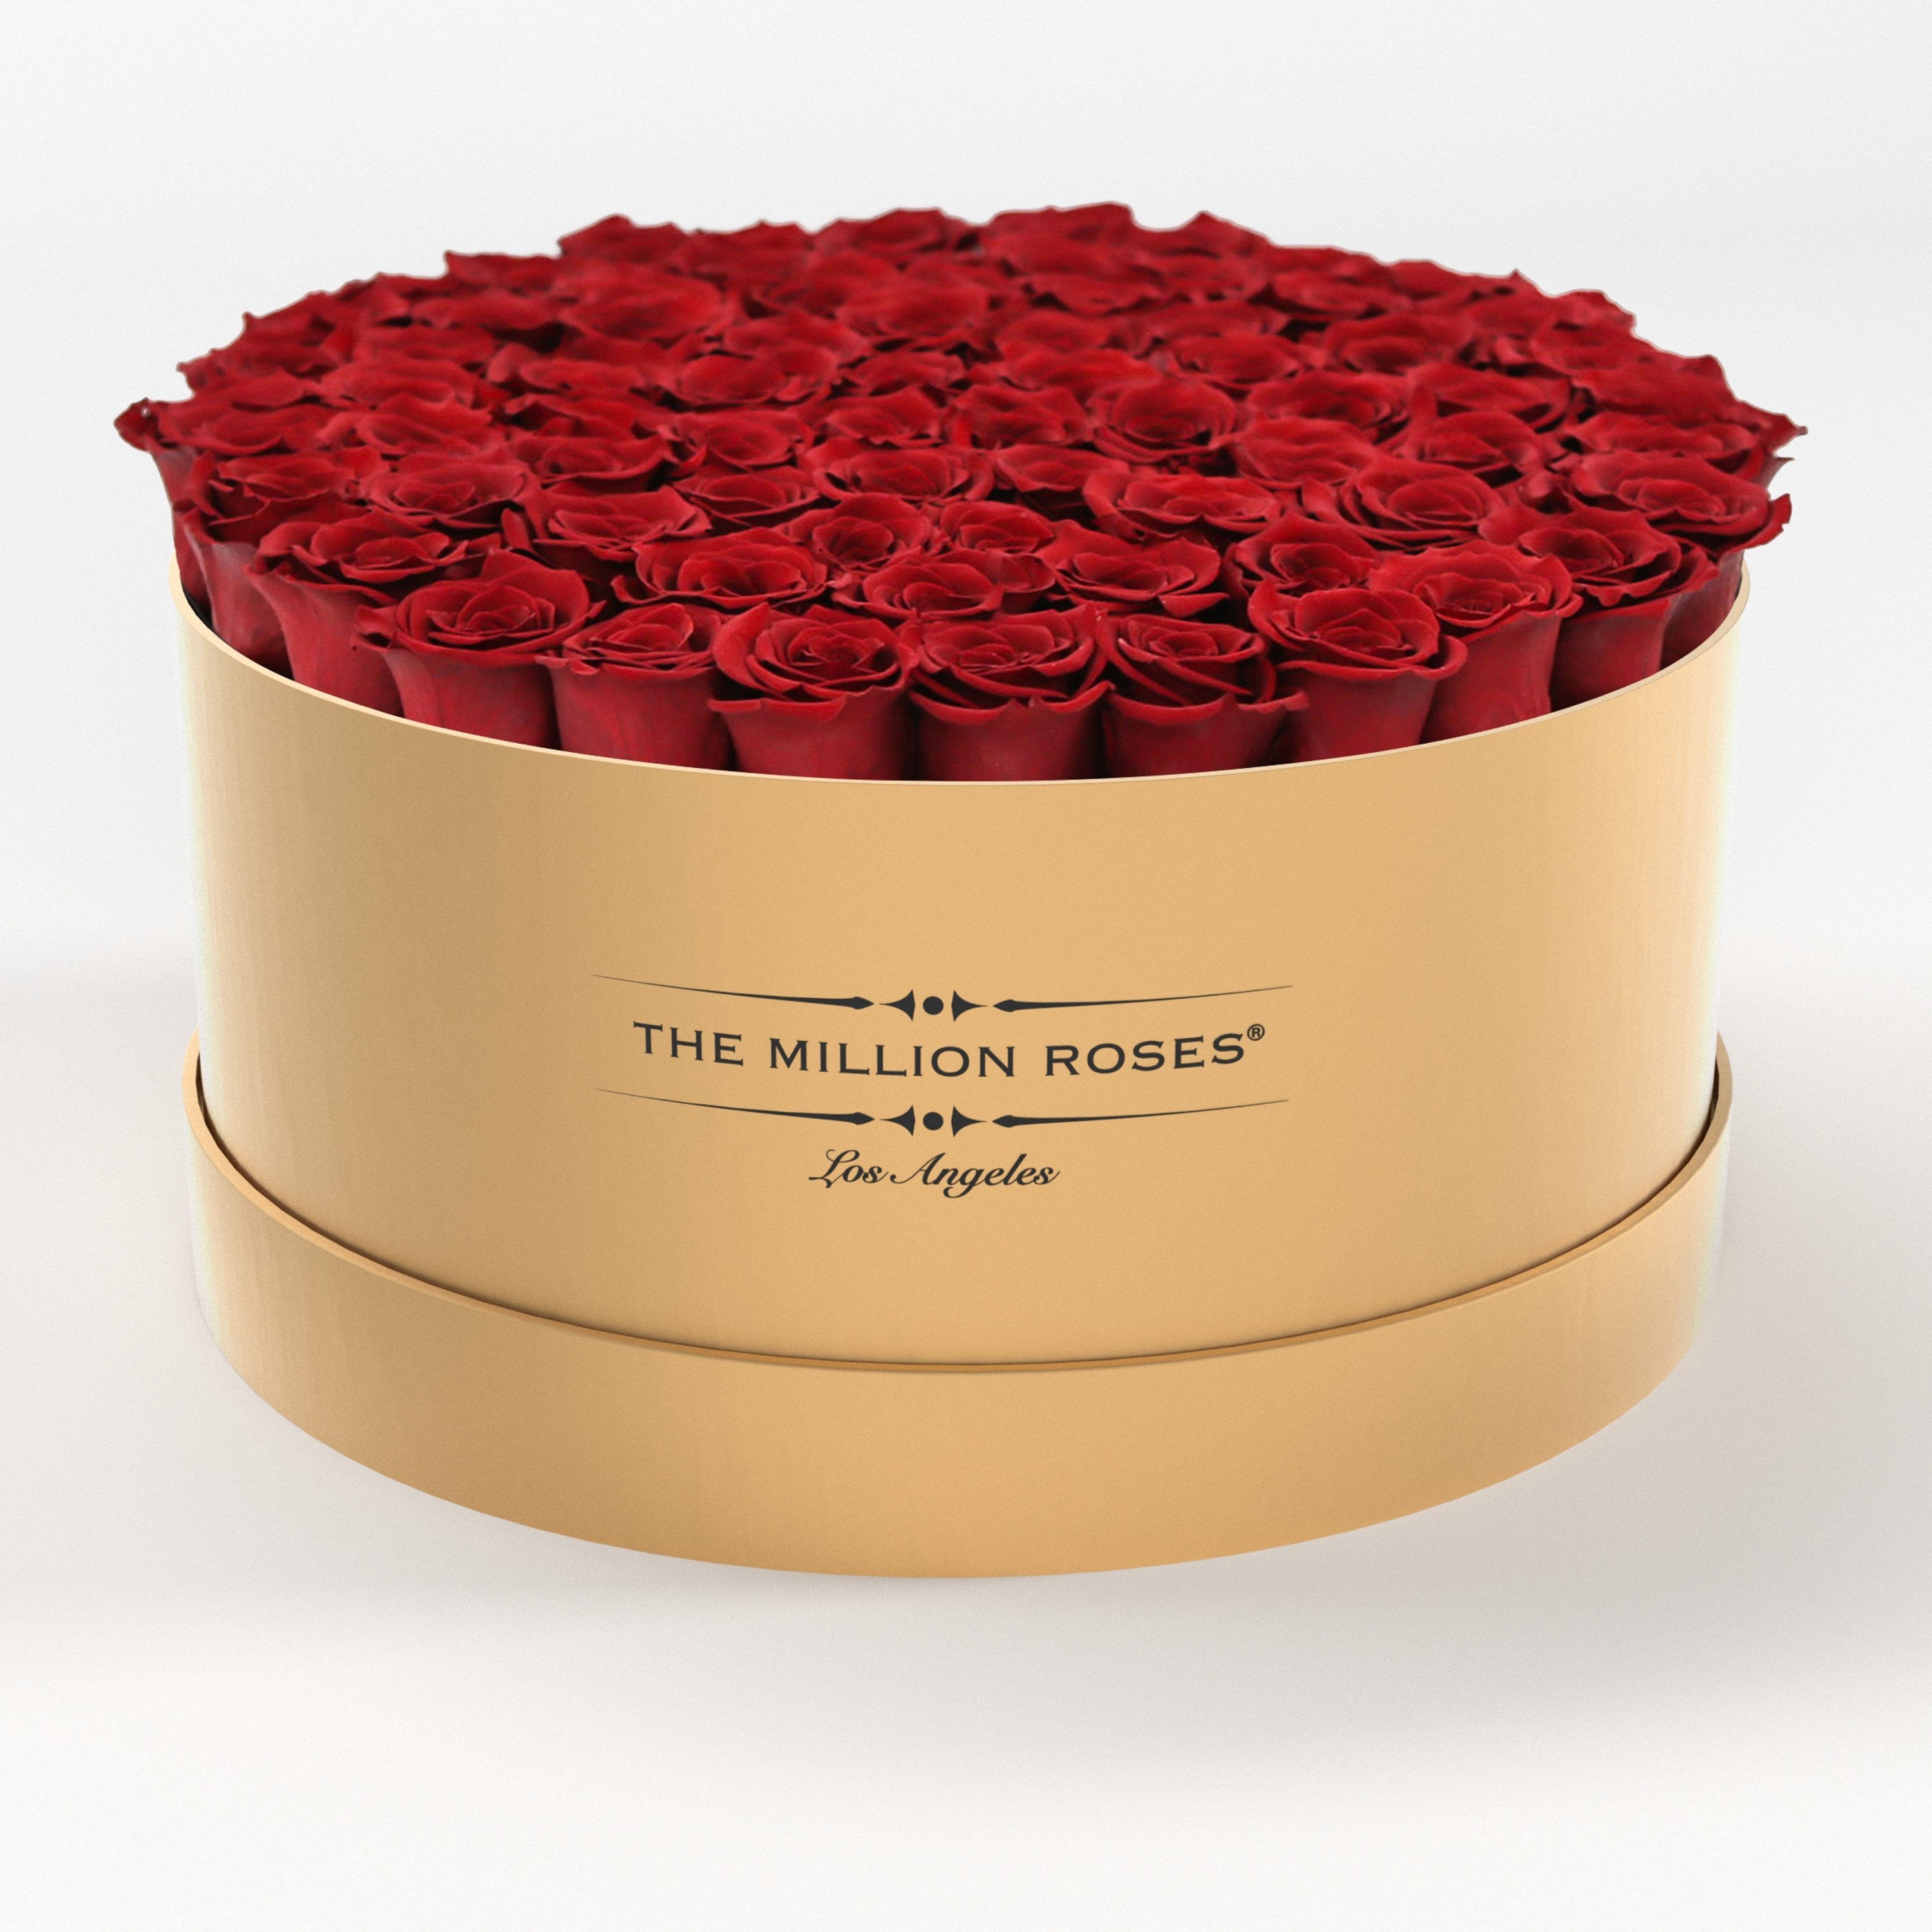 ( LA ) Gold- Deluxe Box with Red Roses Kit - the million roses